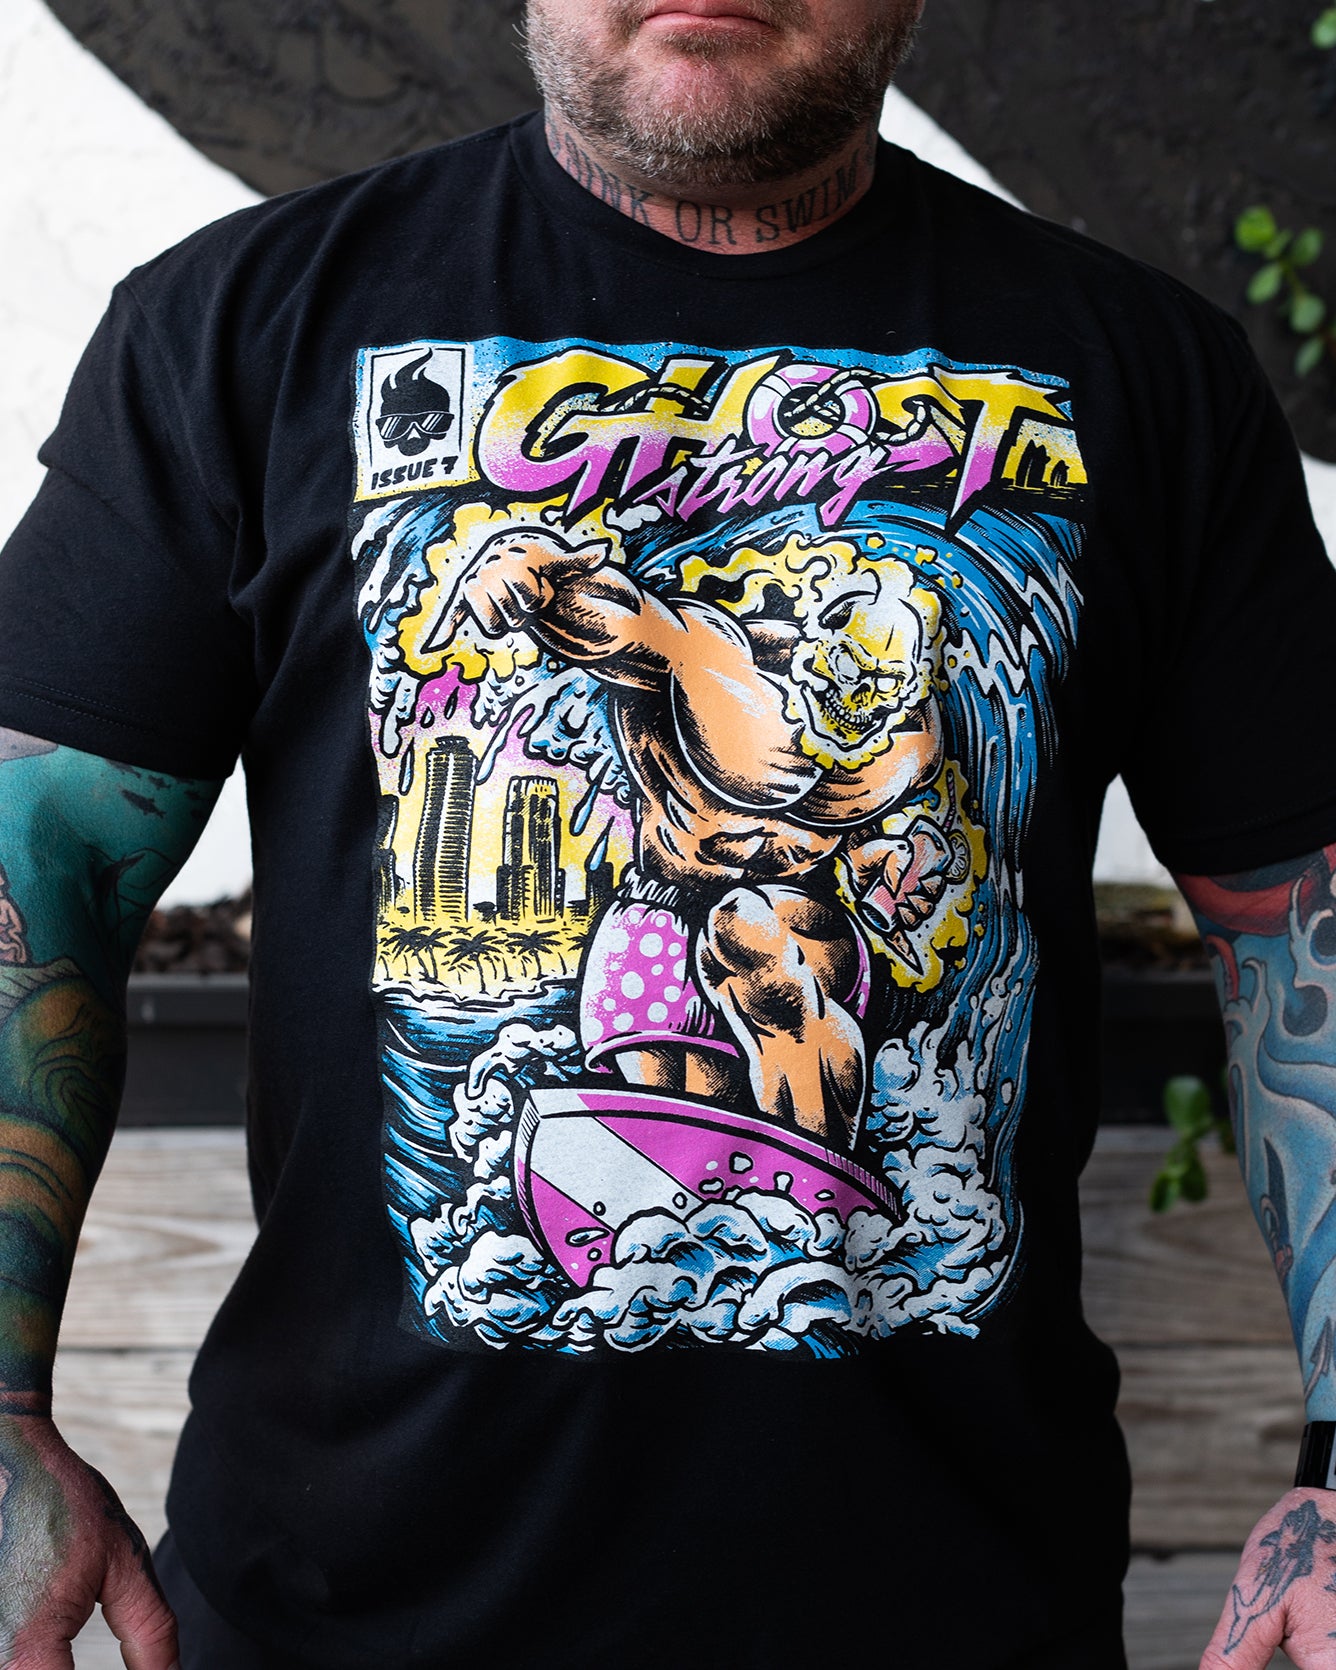 Ghost Issue #7 Miami Edition T-Shirt